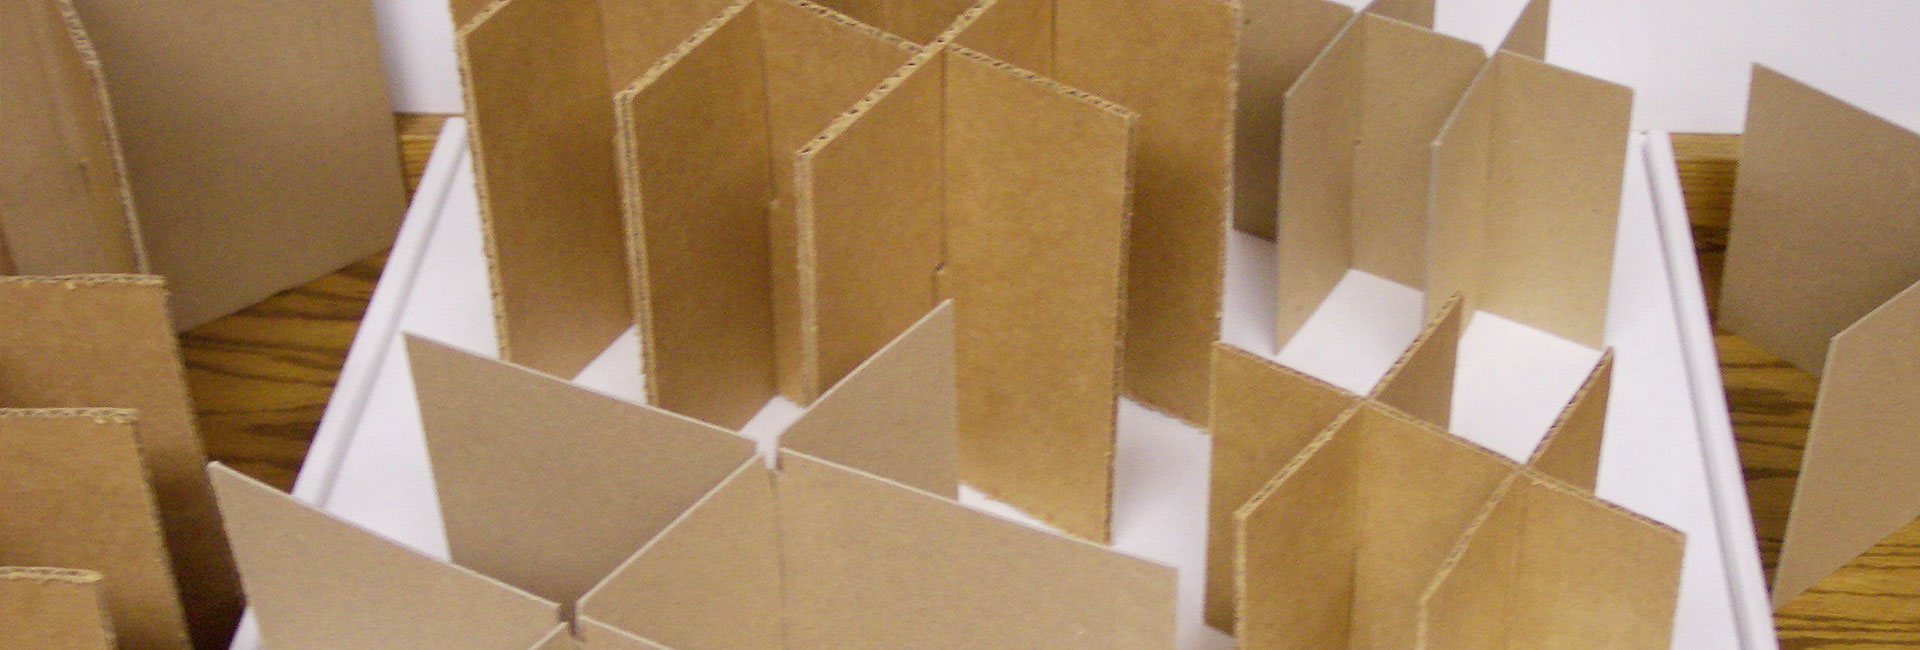 carton boxes manufacturer in hyderabad